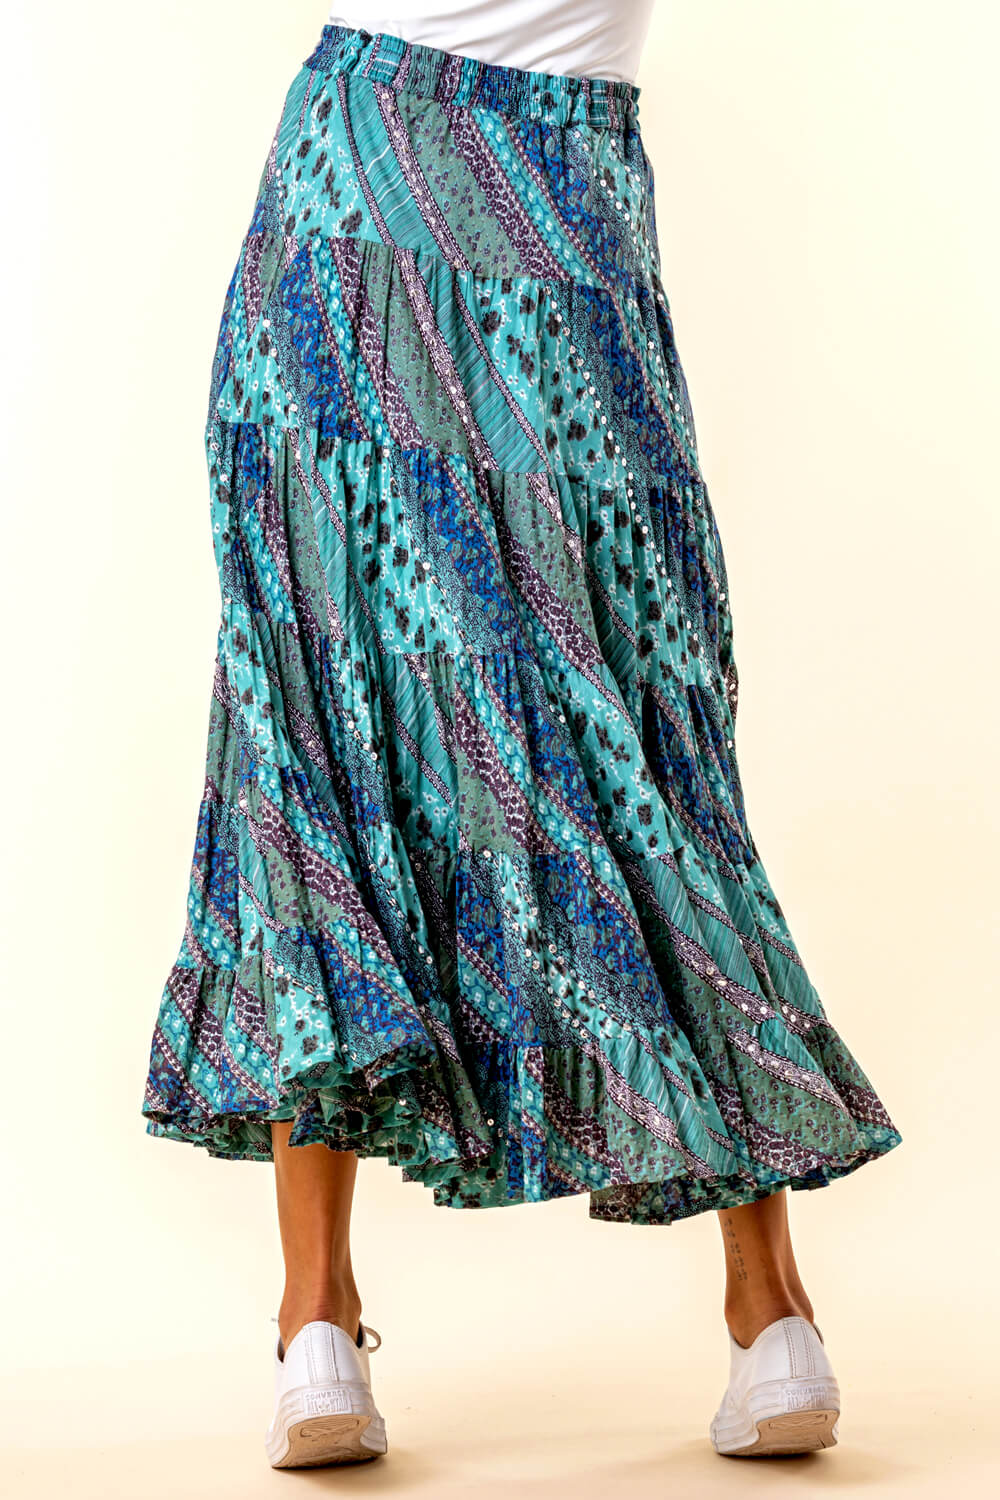 Turquoise Paisley Print Sequin Embellished Skirt, Image 2 of 4